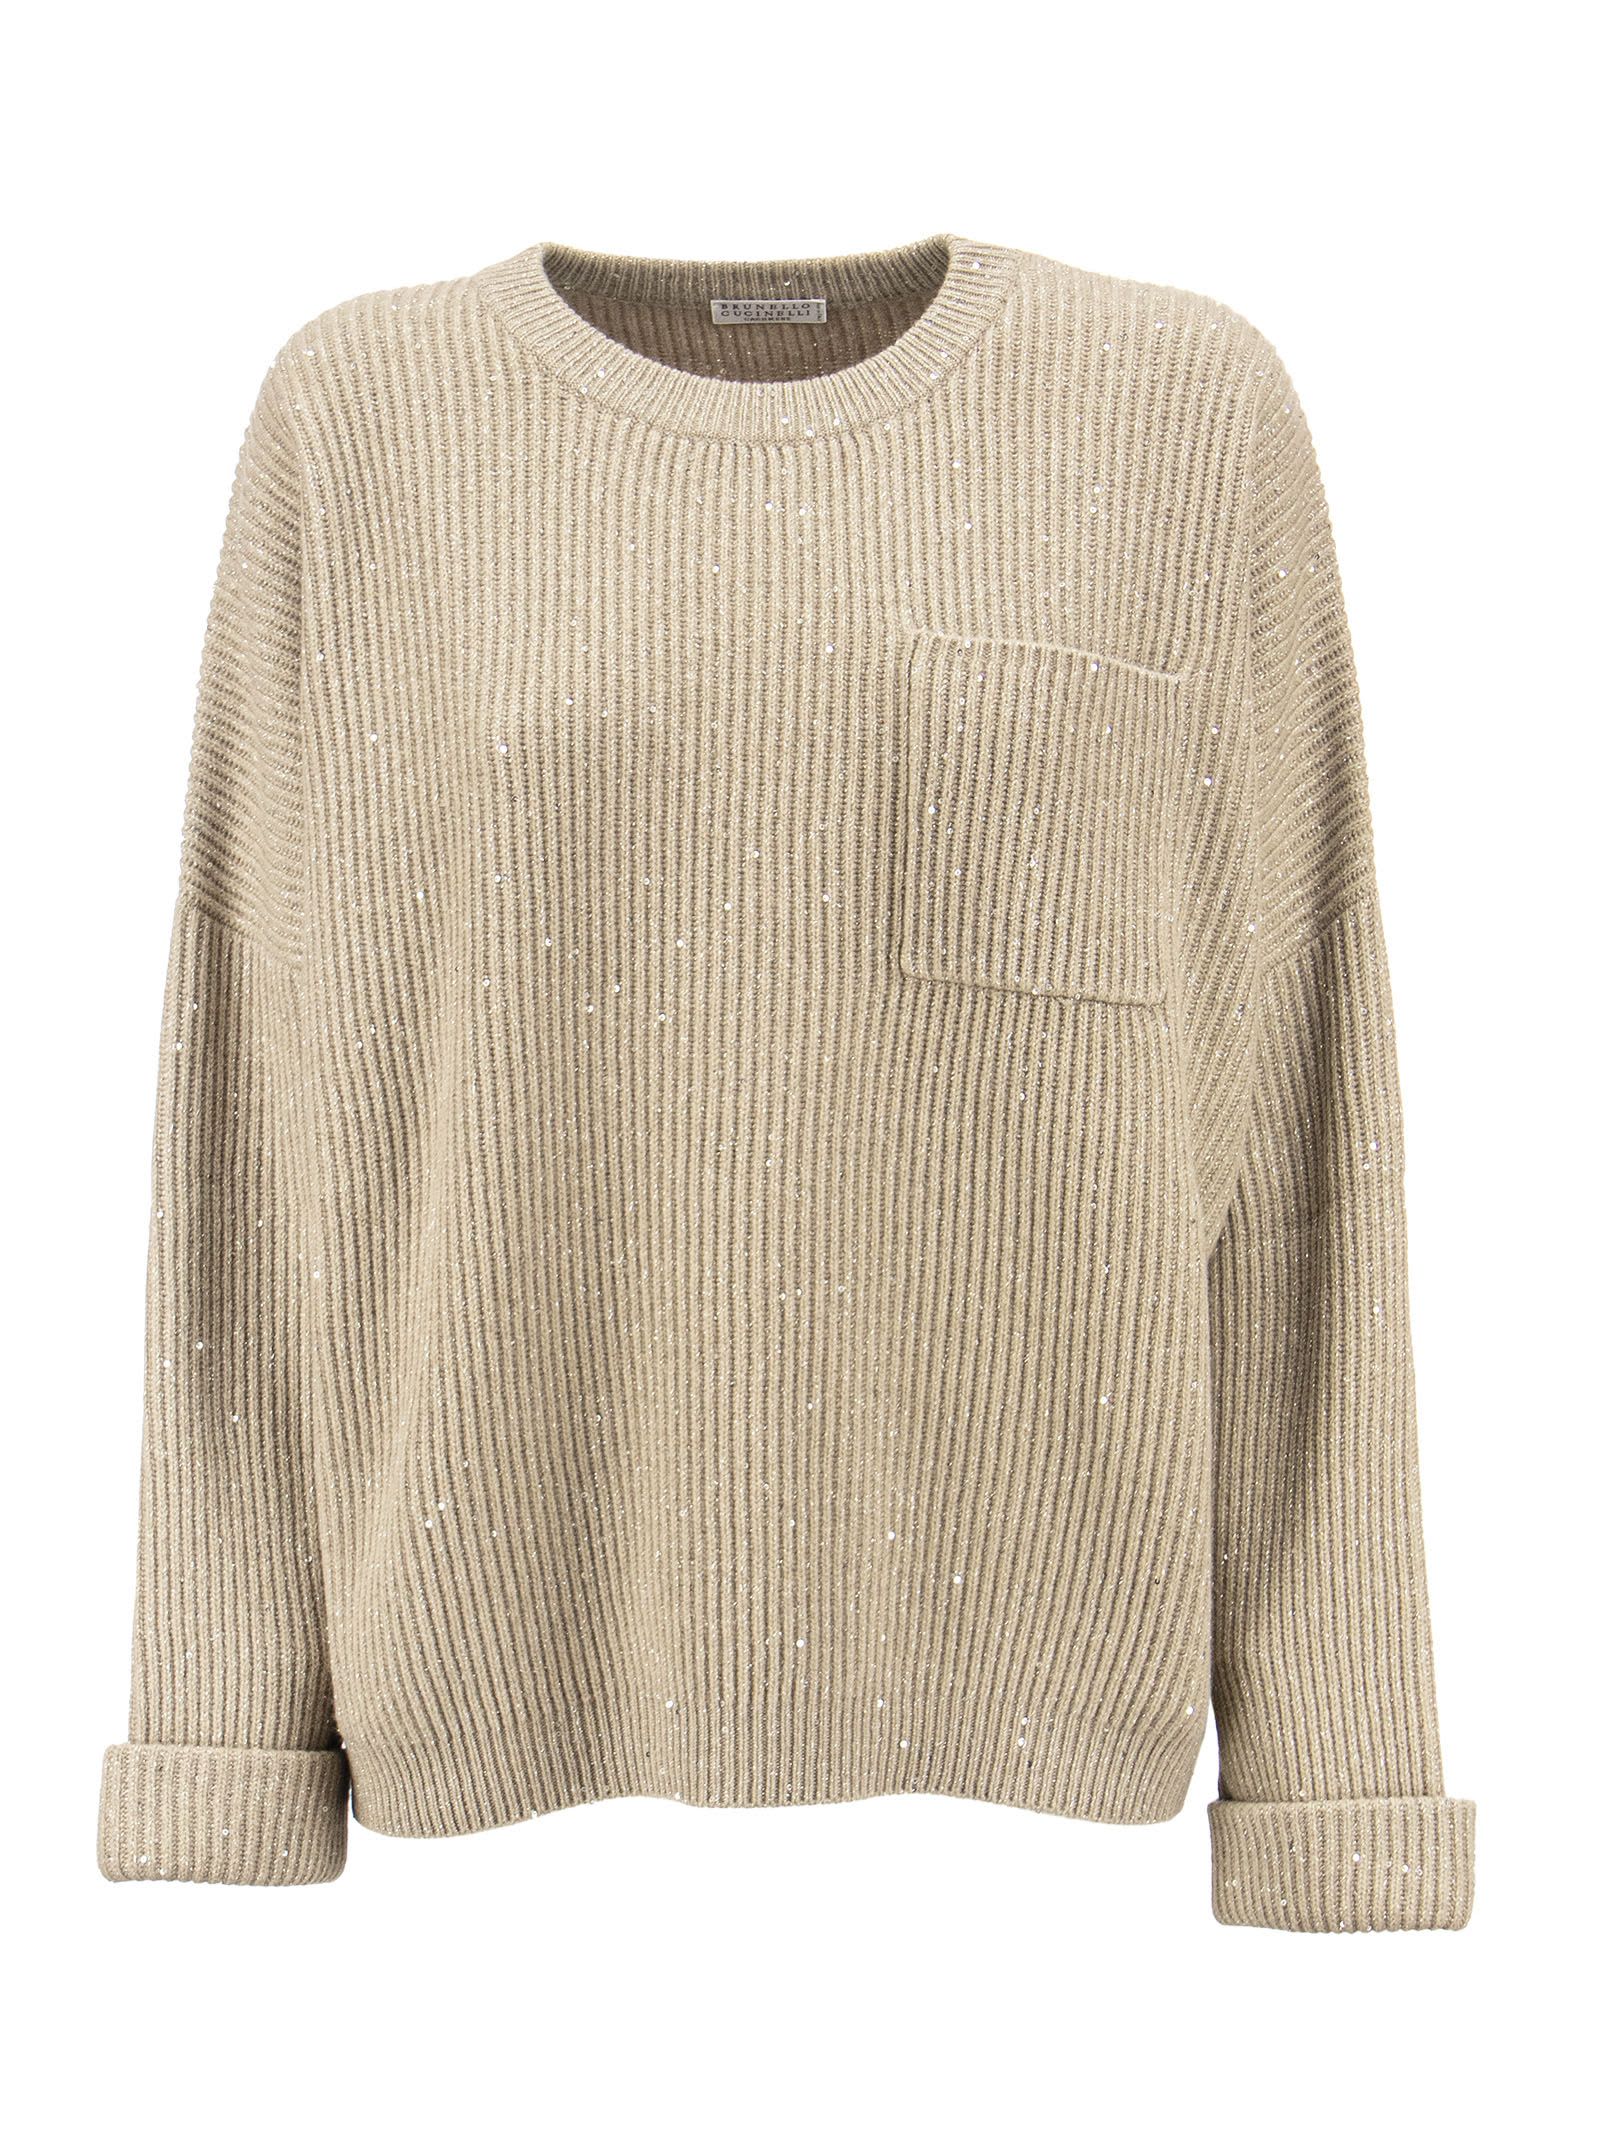 Brunello Cucinelli Dazzling & Sparkling Cashmere And Wool Rib Sweater With Breast Pocket